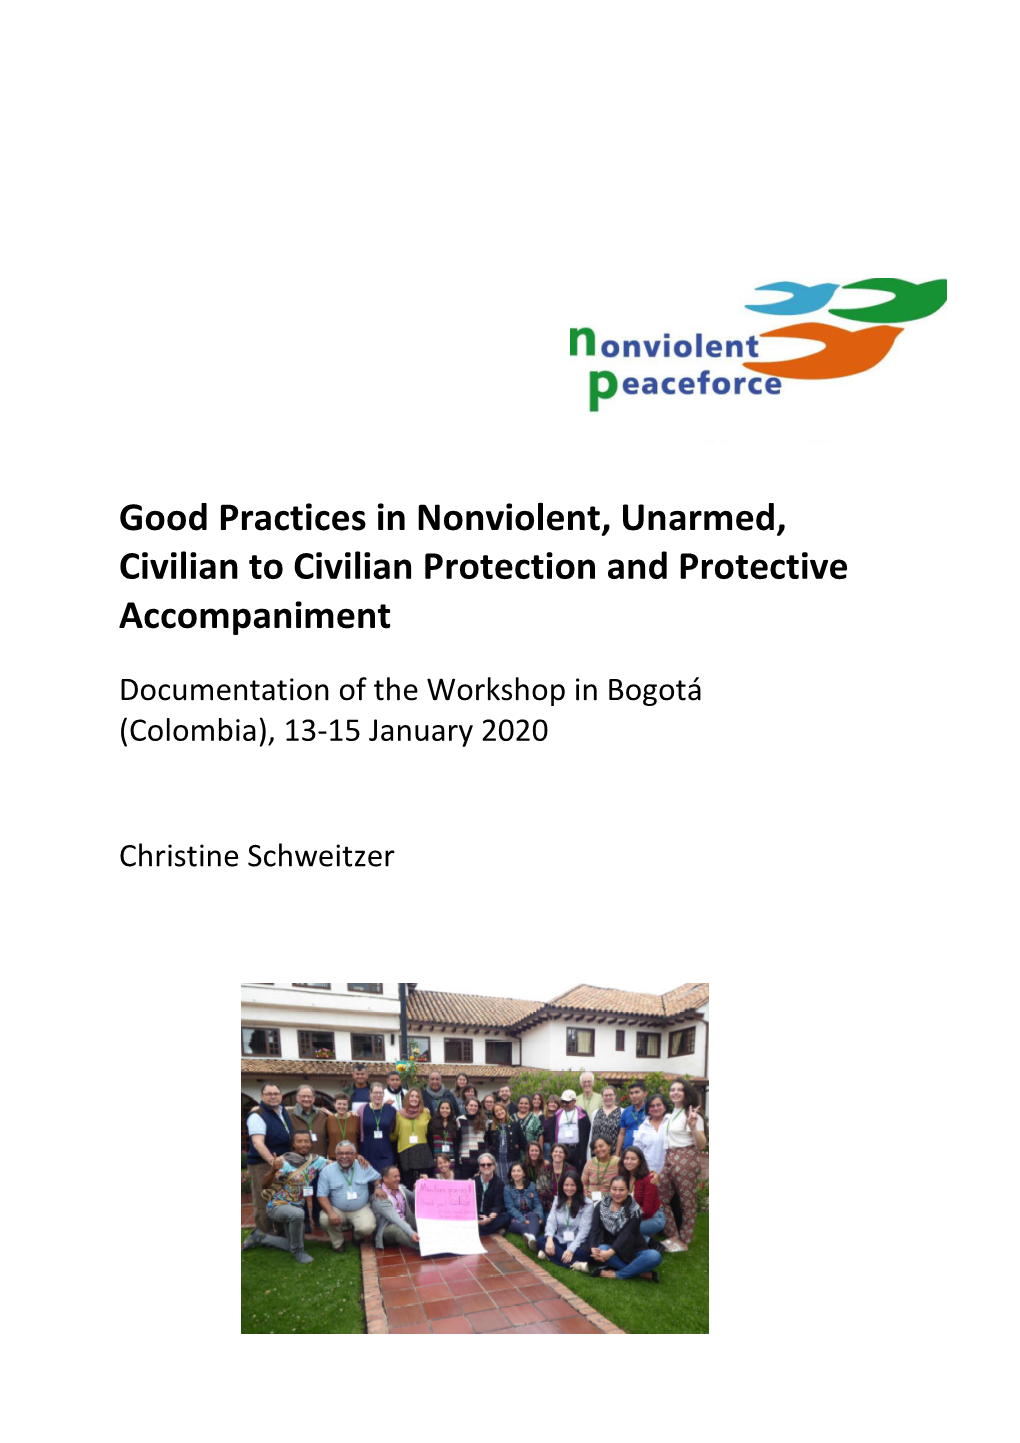 Good Practices in Nonviolent, Unarmed, Civilian to Civilian Protection and Protective Accompaniment